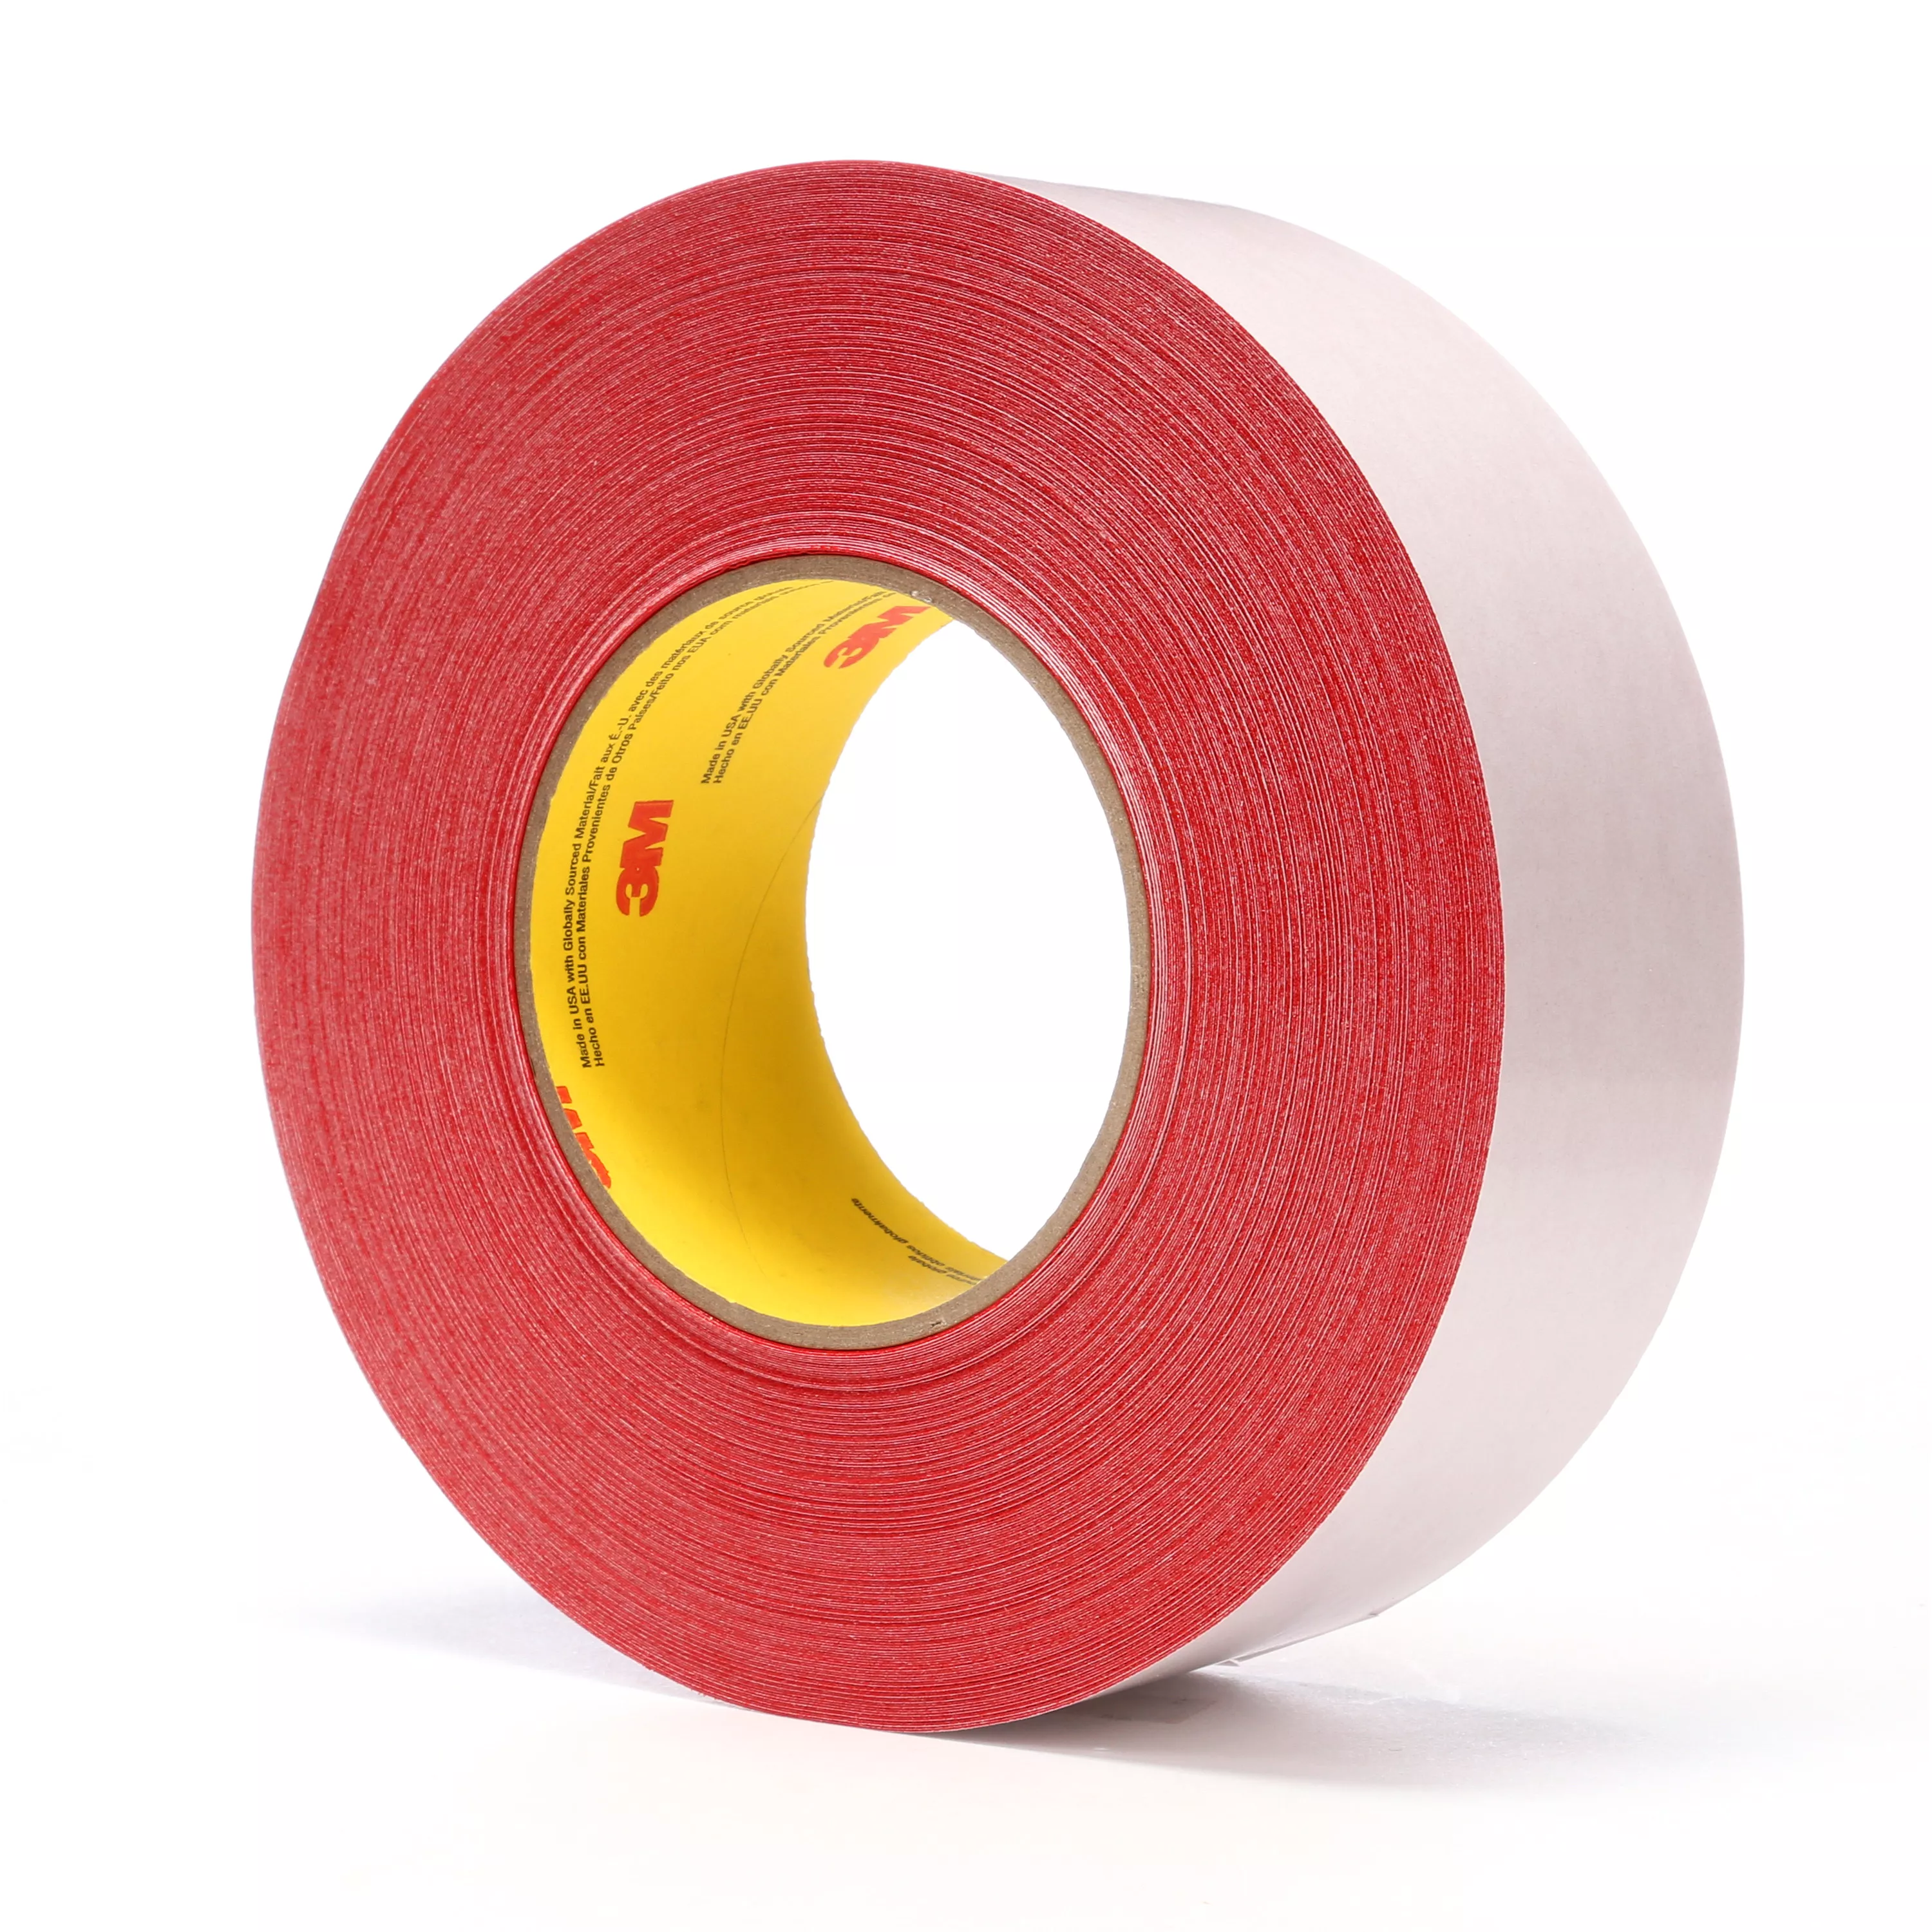 3M™ Double Coated Tape 9741R, Red, 48 mm x 55 m, 6.5 mil, 24 Roll/Case